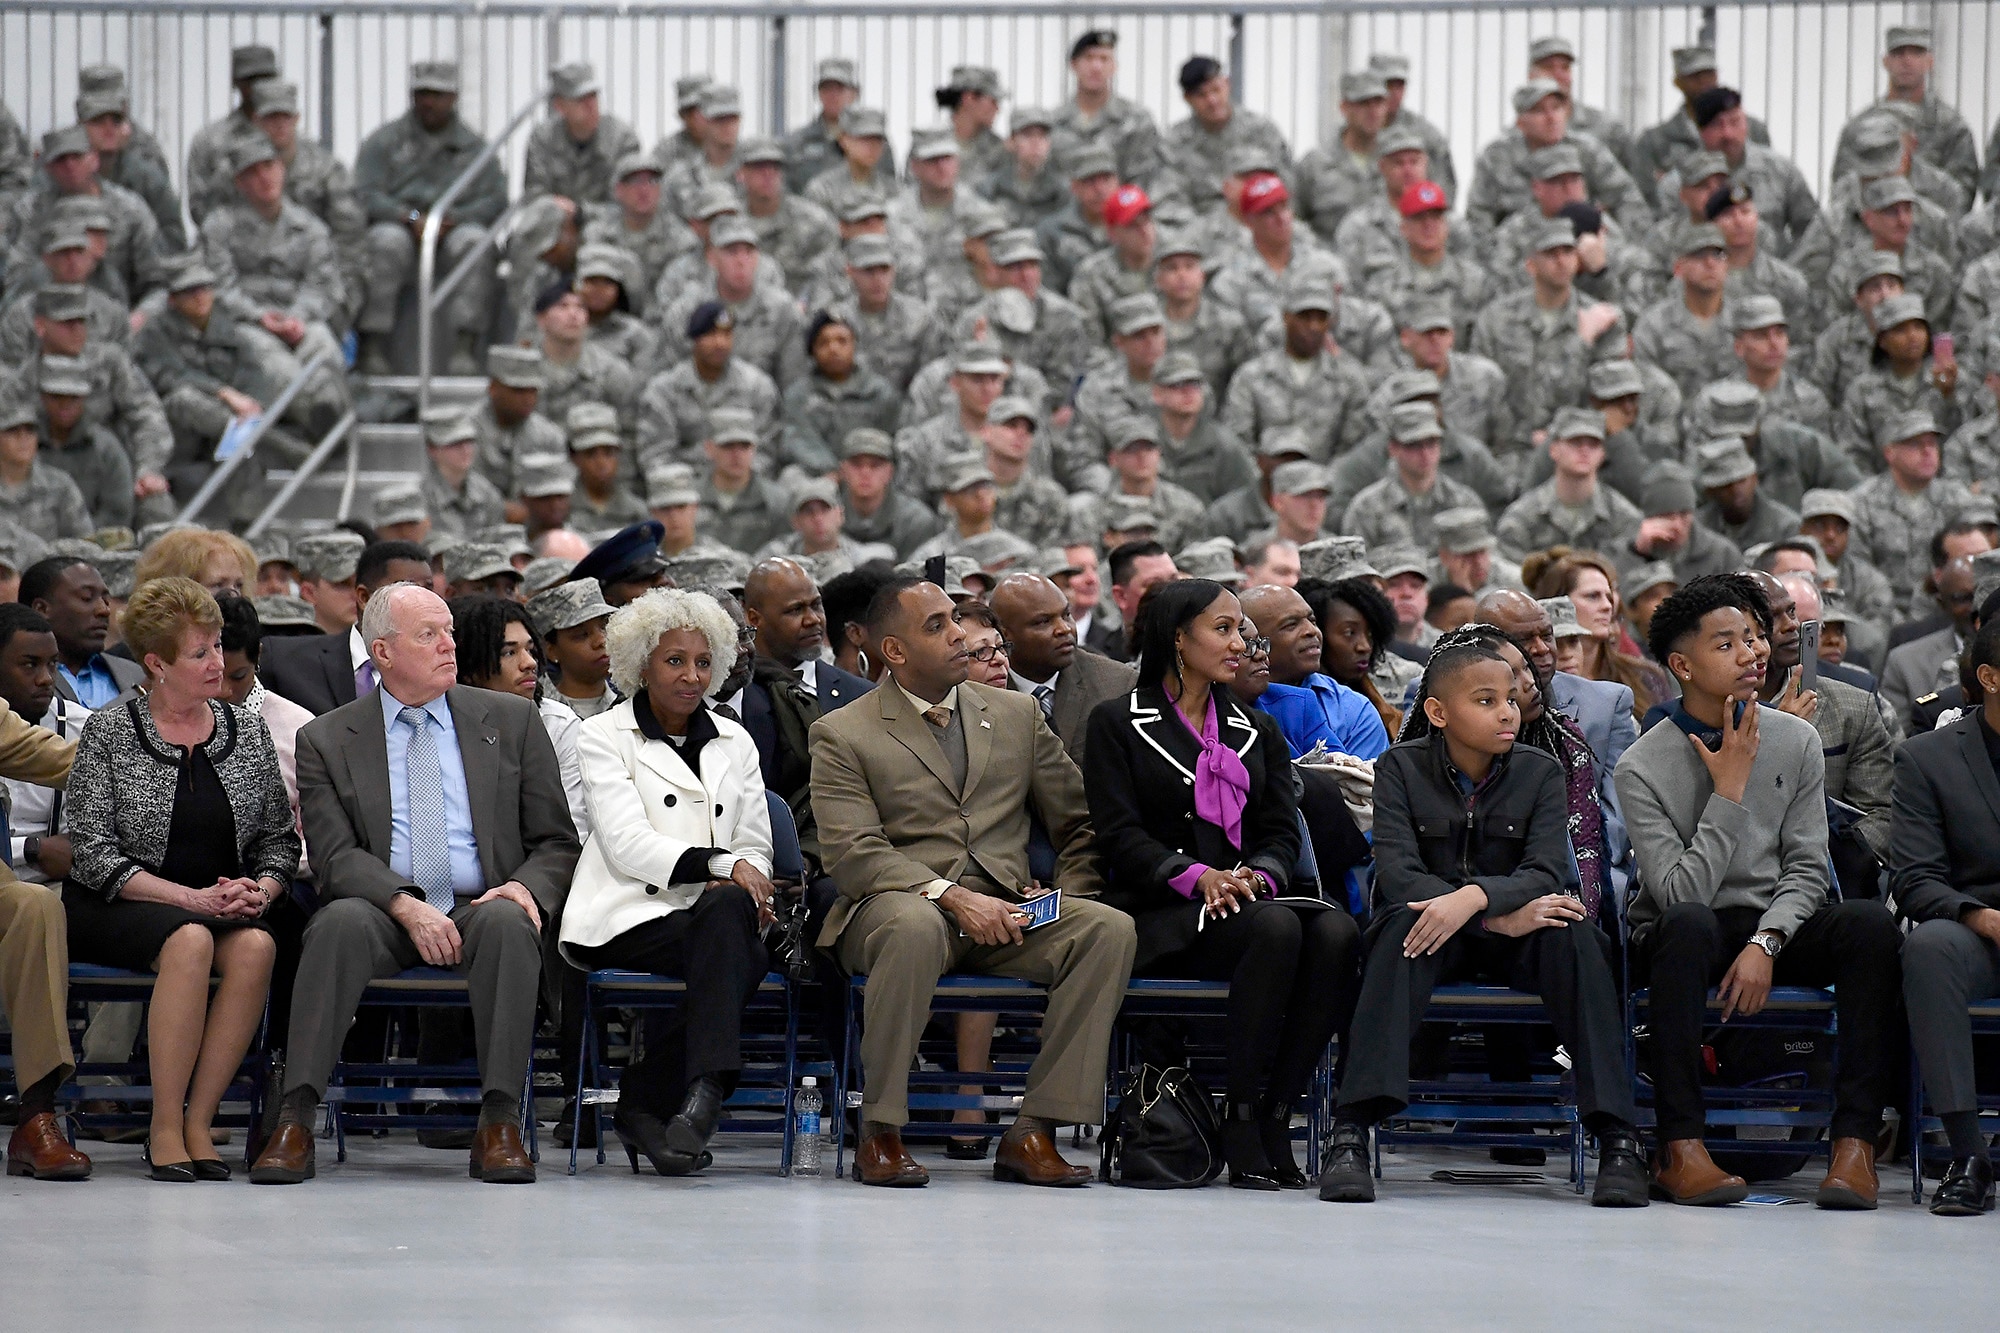 Family and friends of Chief Master Sgt. of the Air Force Kaleth O. Wright listen during his appointment ceremony on Joint Base Andrews, Md., Feb. 17, 2017. Wright succeeds Chief Master Sgt. of the Air Force James A. Cody, who retires after 32 years of service, as the 18th Airman to hold this position. (U.S. Air Force photo/Scott M. Ash)